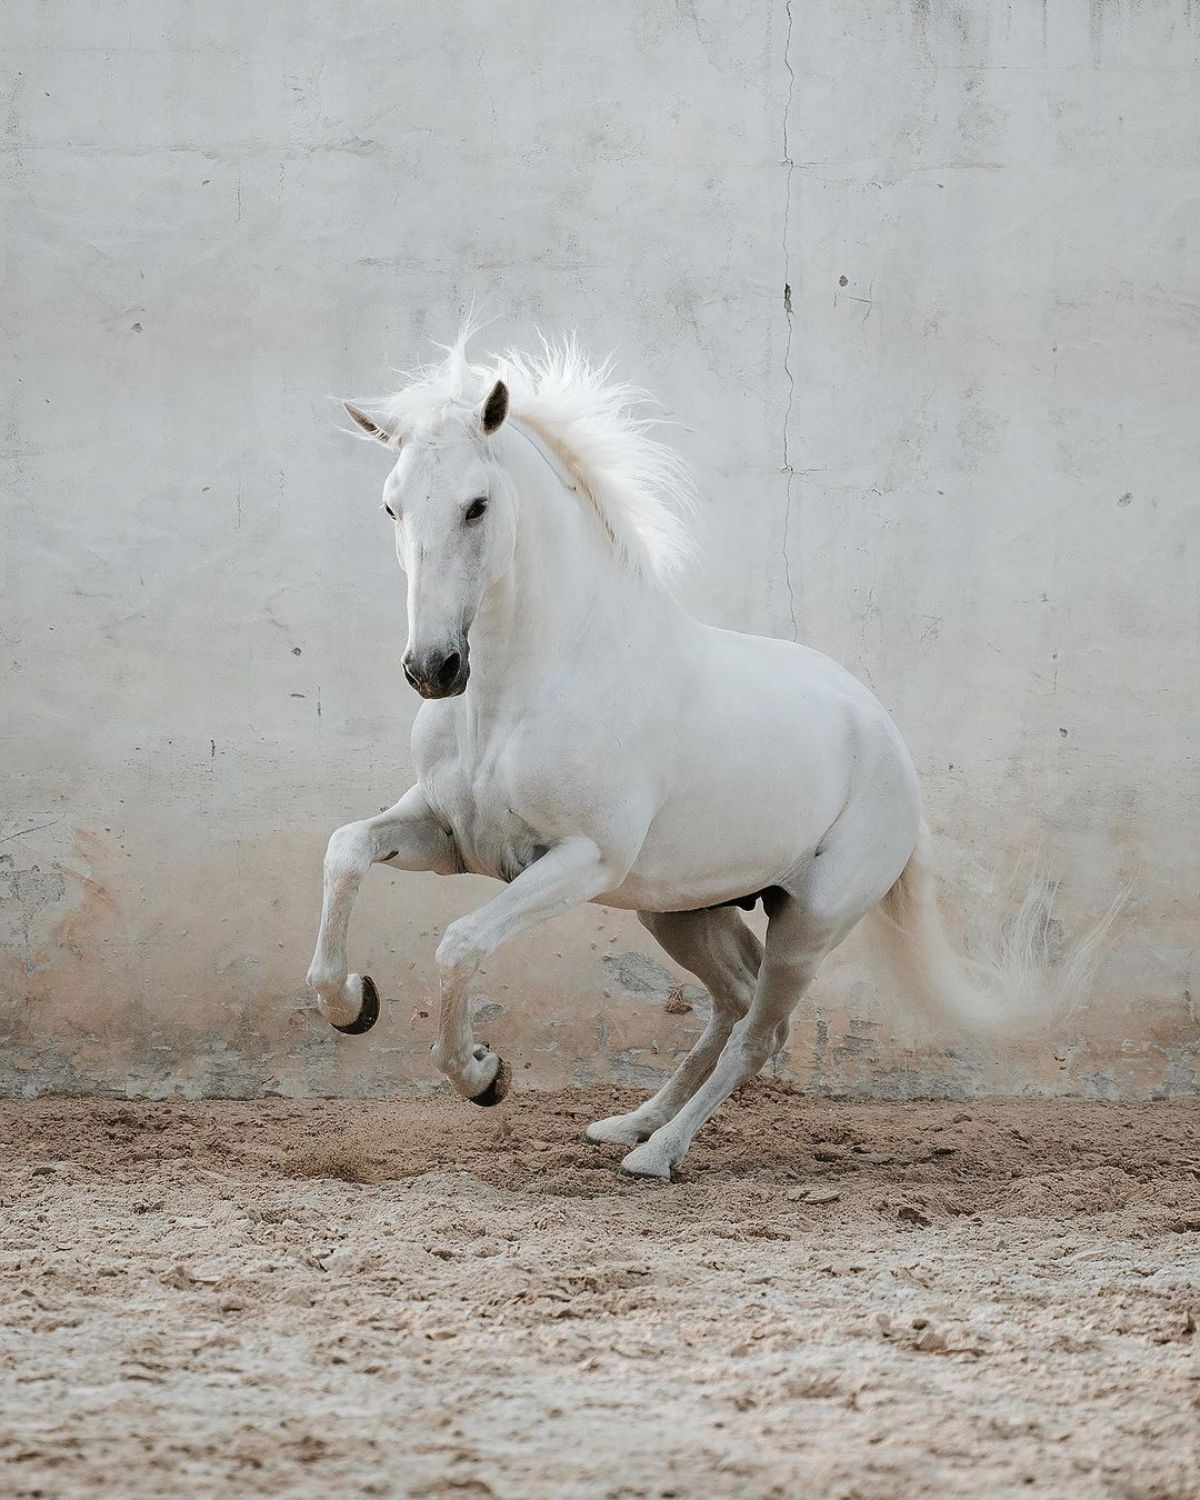 A beautiful white Lusitano horse jumps in the arena.